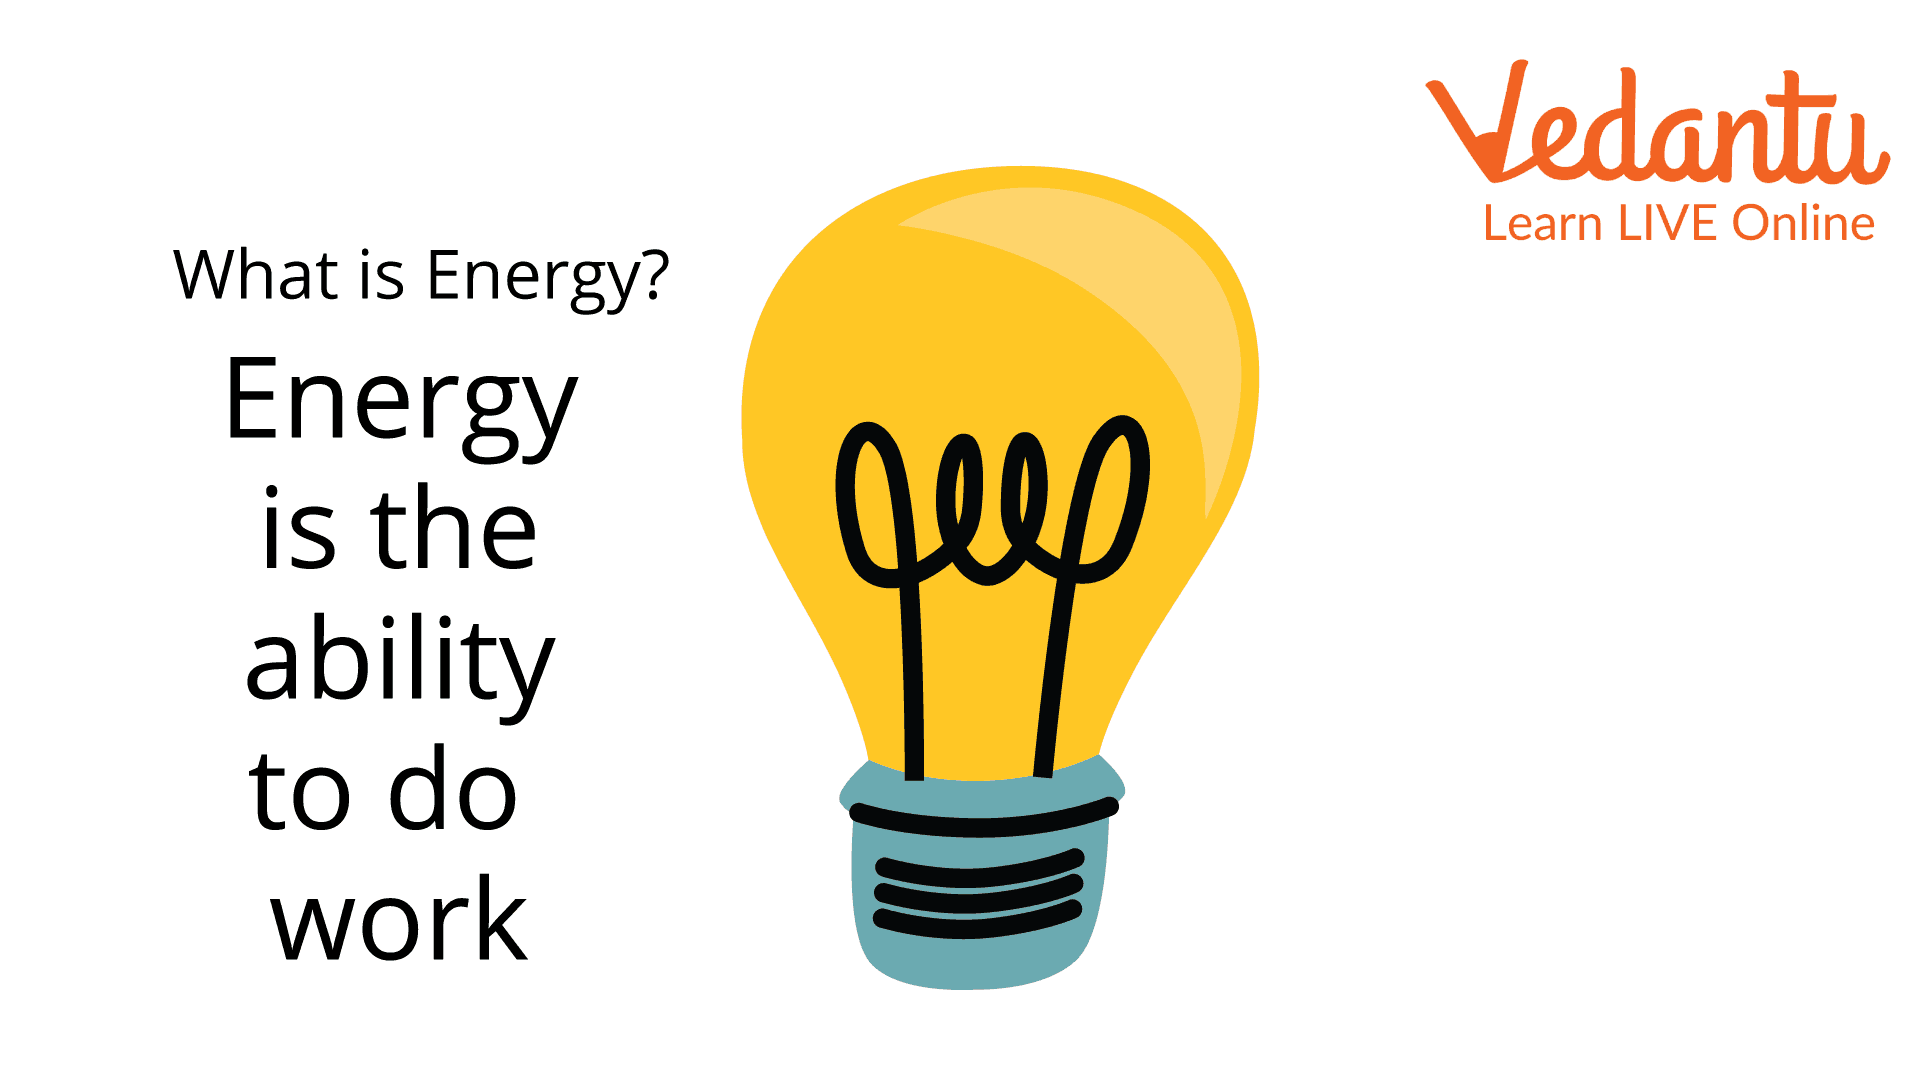 What is energy